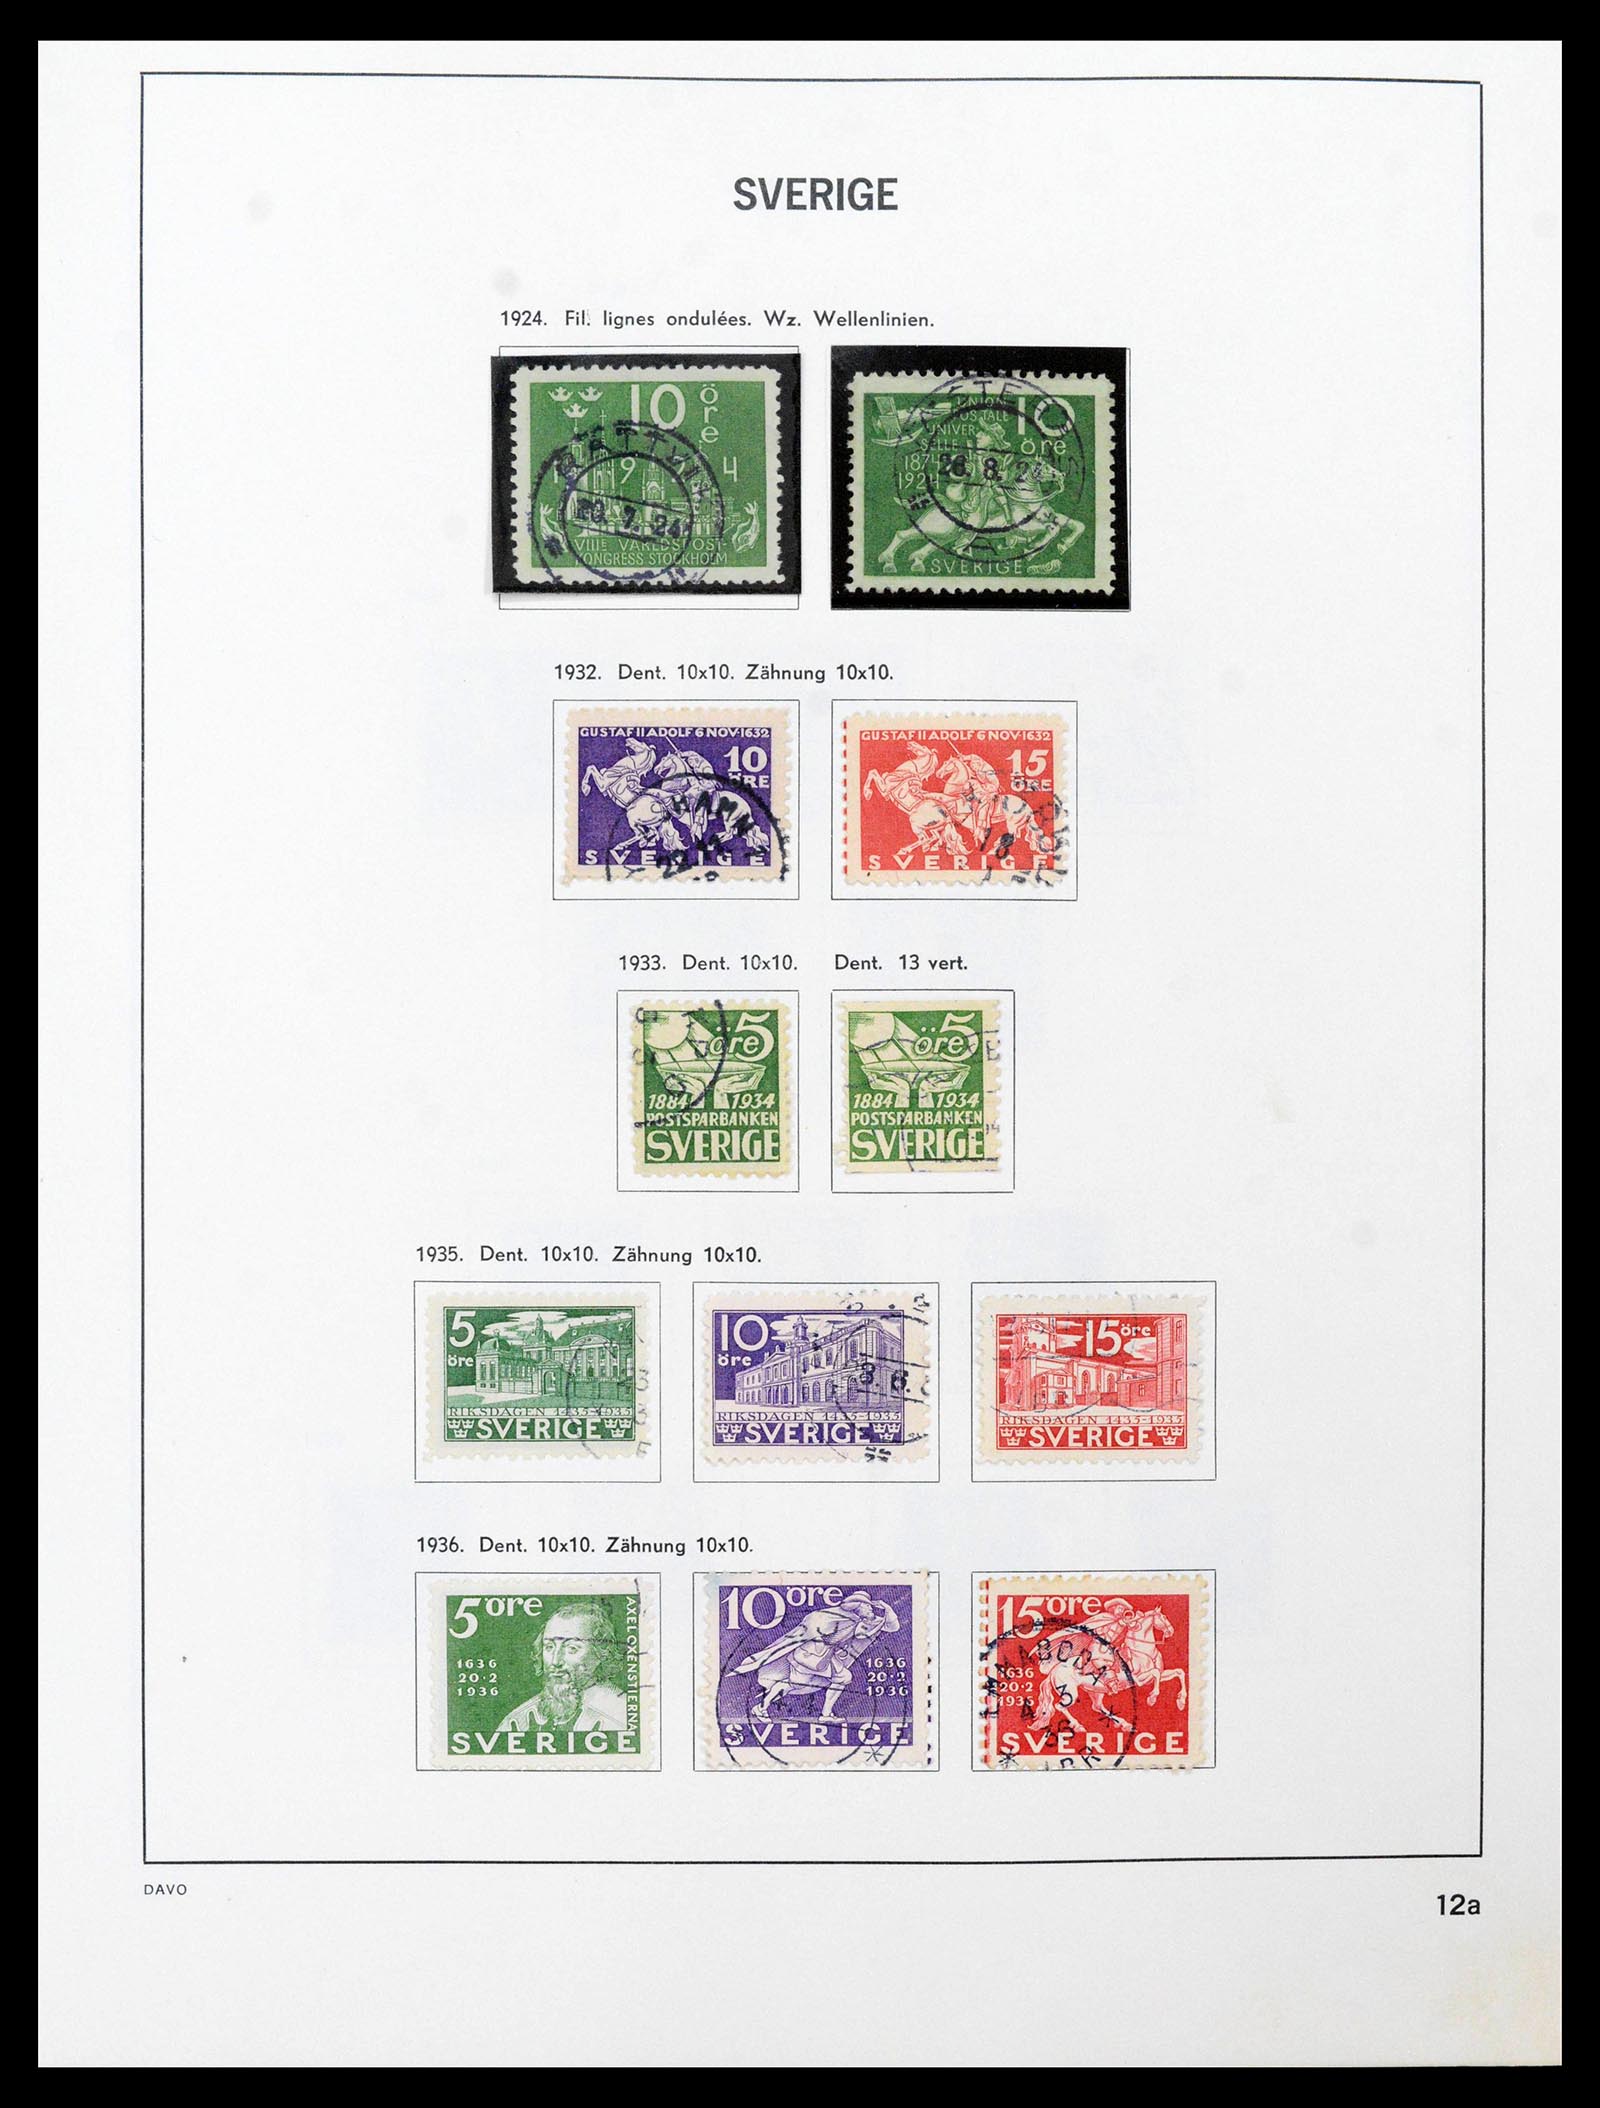 39331 0014 - Stamp collection 39331 Sweden 1855-2005.